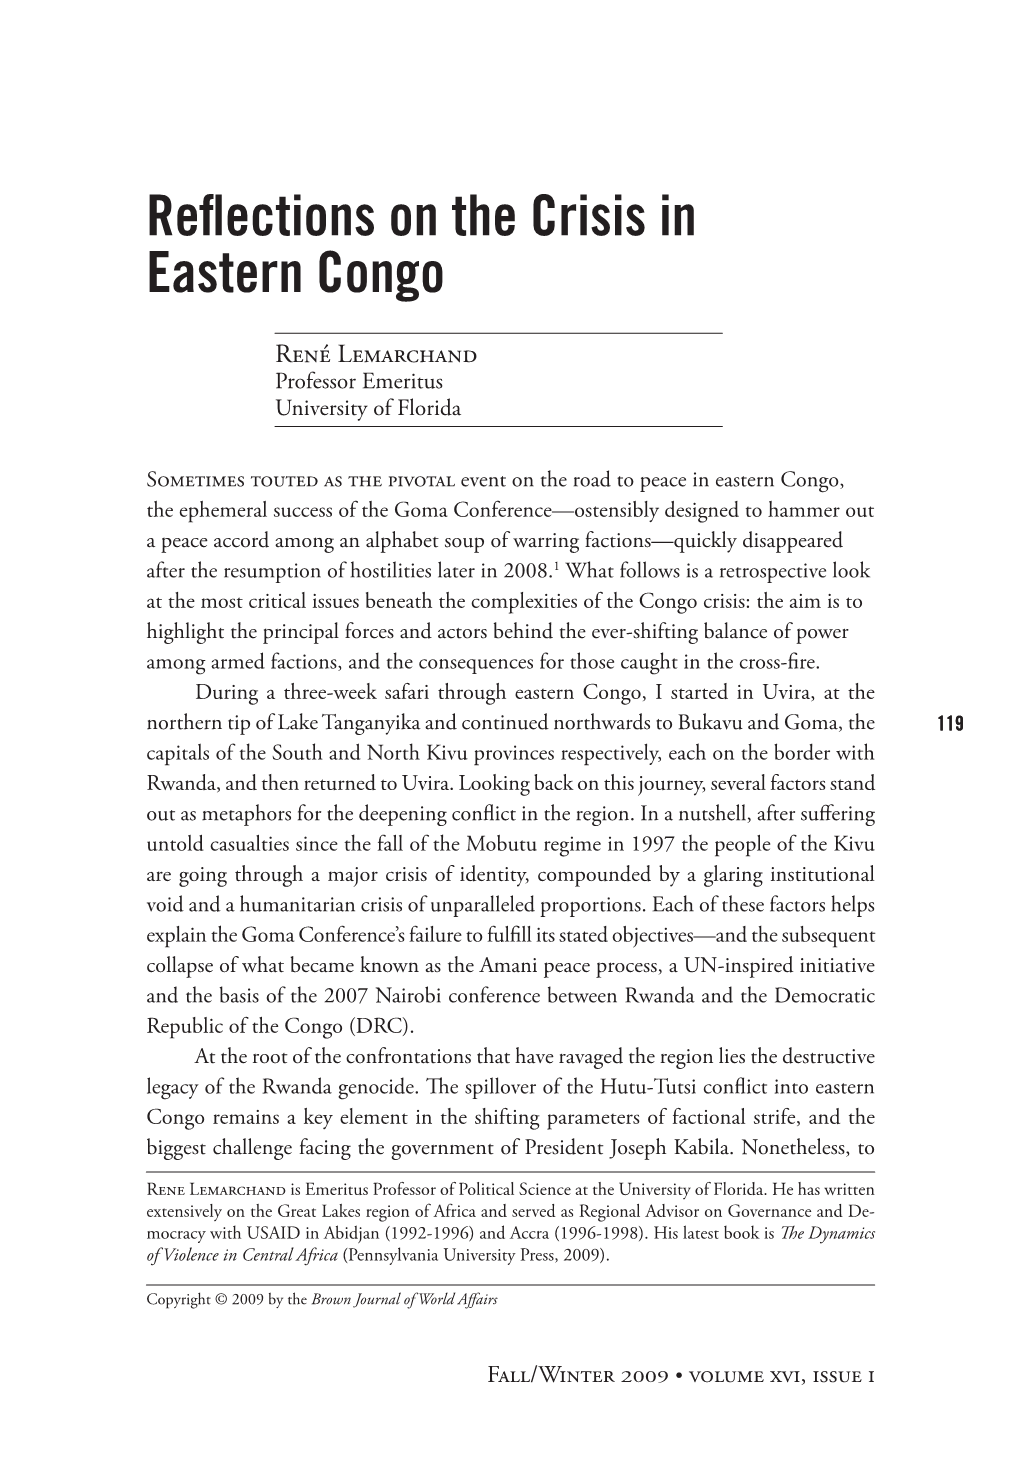 Reflections on the Crisis in Eastern Congo